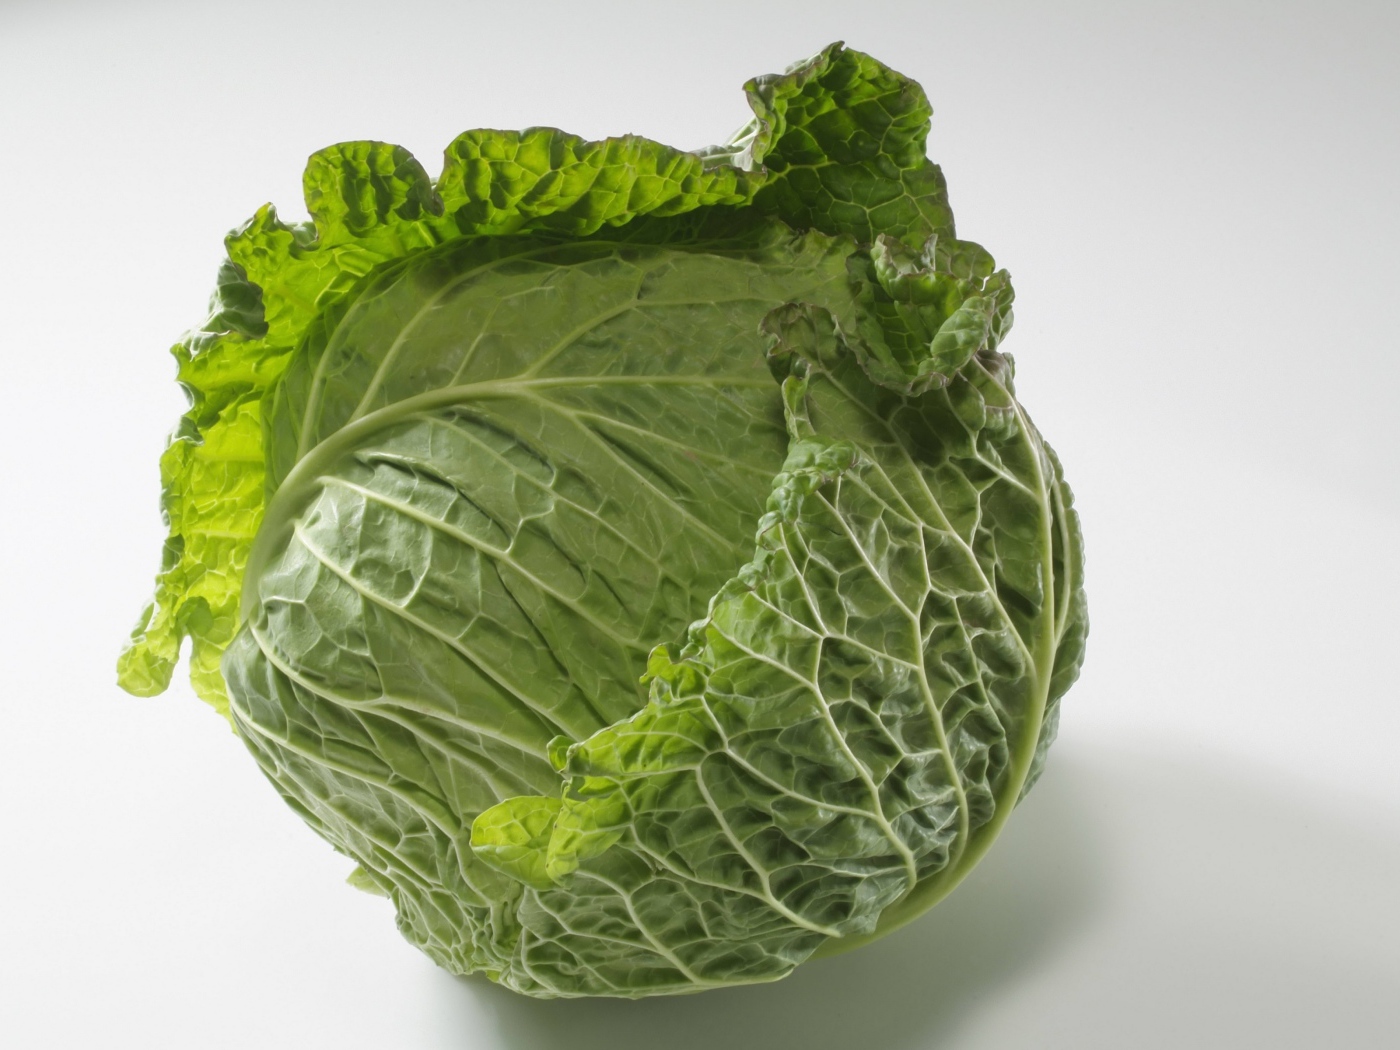 Green head of cabbage on a gray background